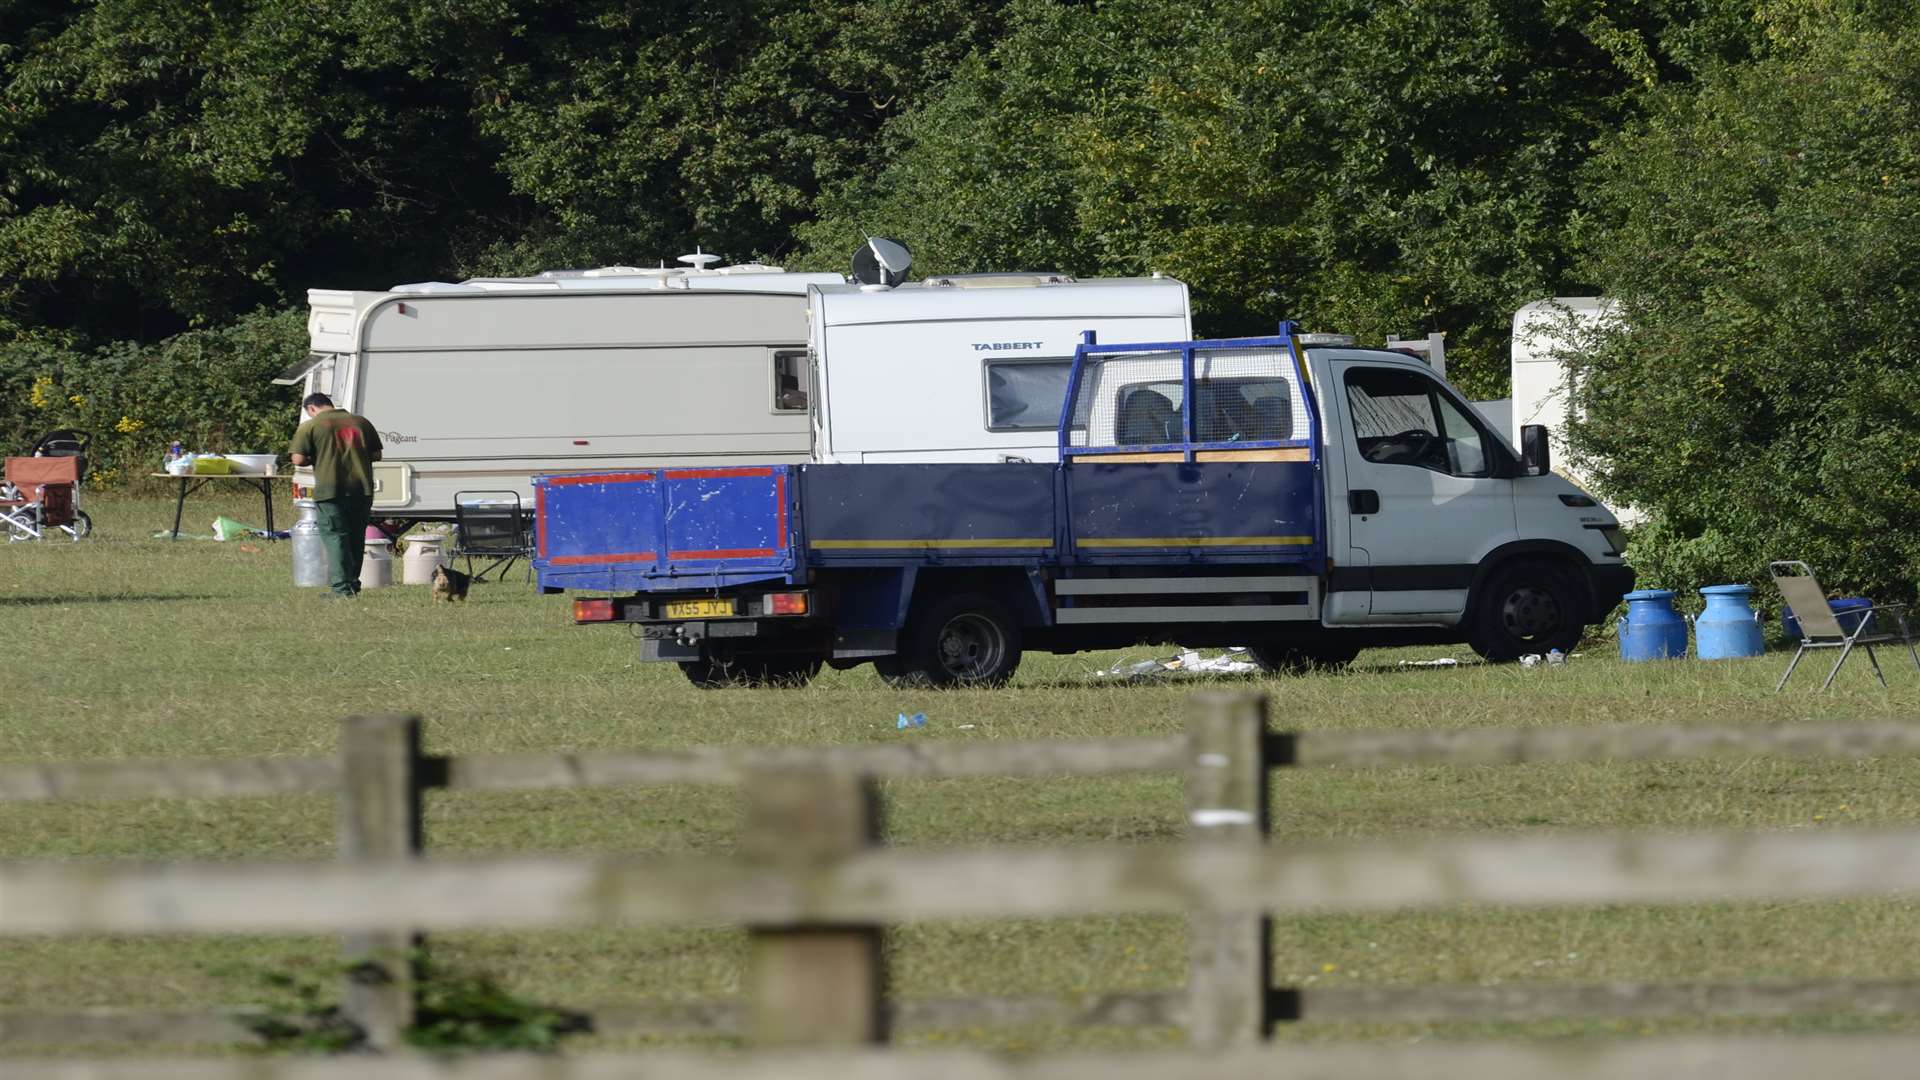 Caravans have been banned from the site. Picture: Gary Browne